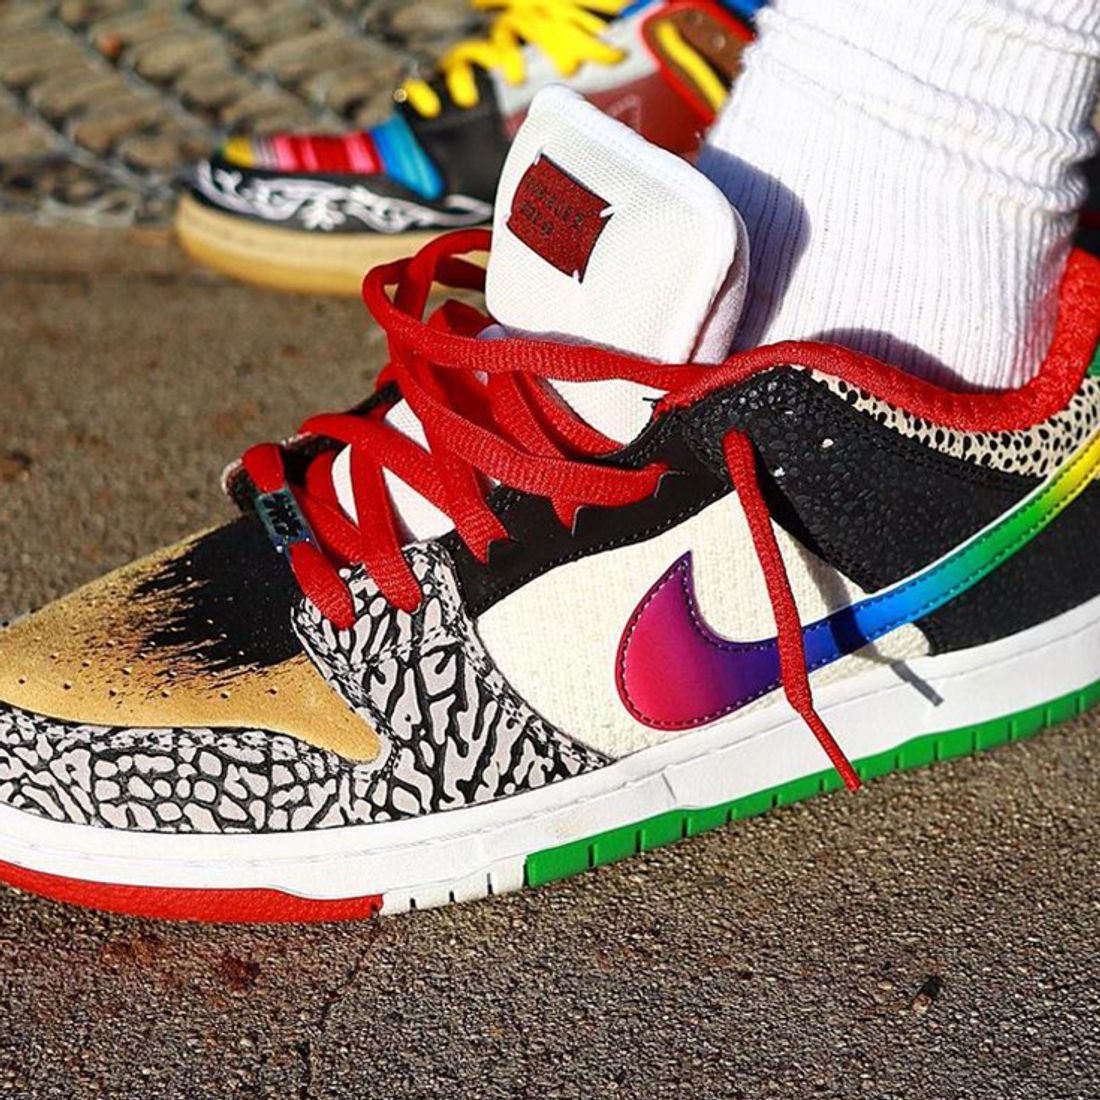 Jurassic Park Kansen ze Here's How People are Styling the Nike SB Dunk Low 'What the P-Rod' -  Sneaker Freaker